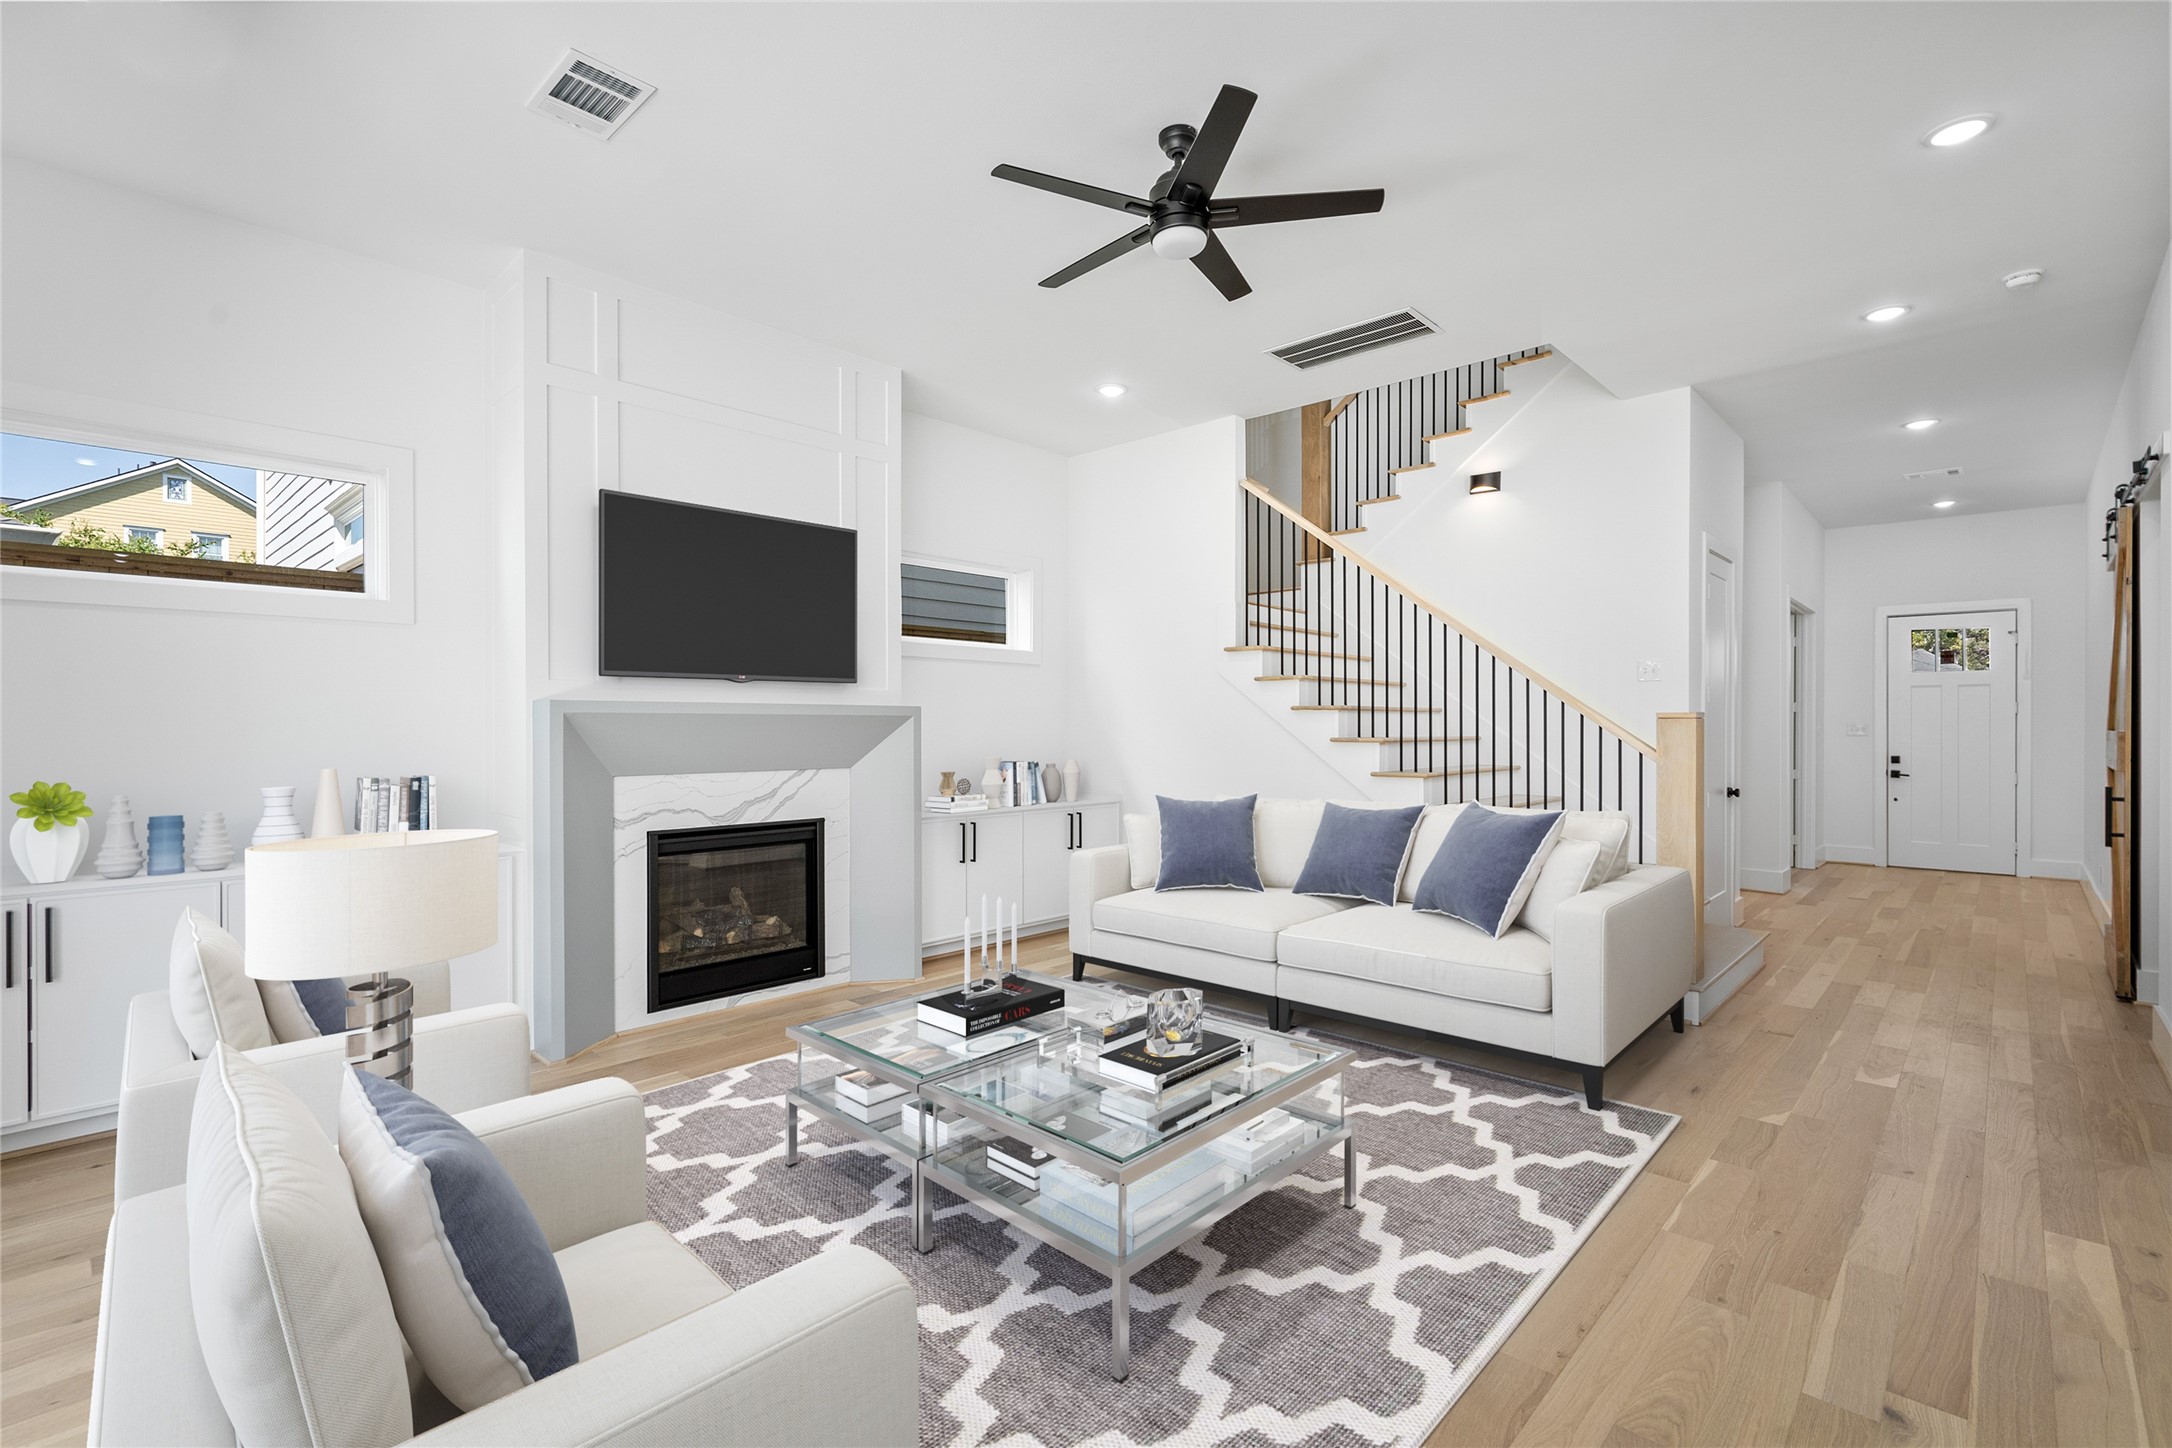 The home features beautiful engineered wood flooring throughout and sits beneath tall ceilings. *Virtual staging has been added*